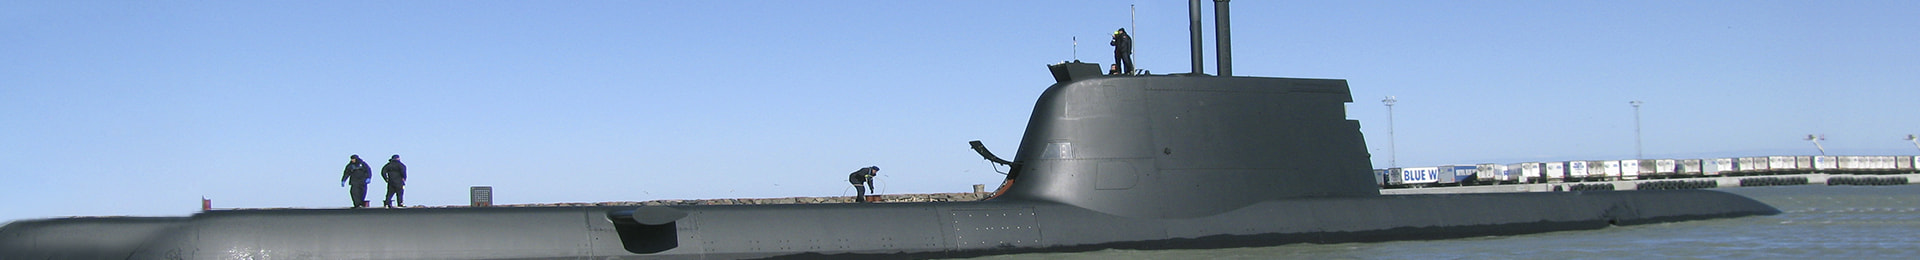 Solutions for Submarines Indra Defence and Security